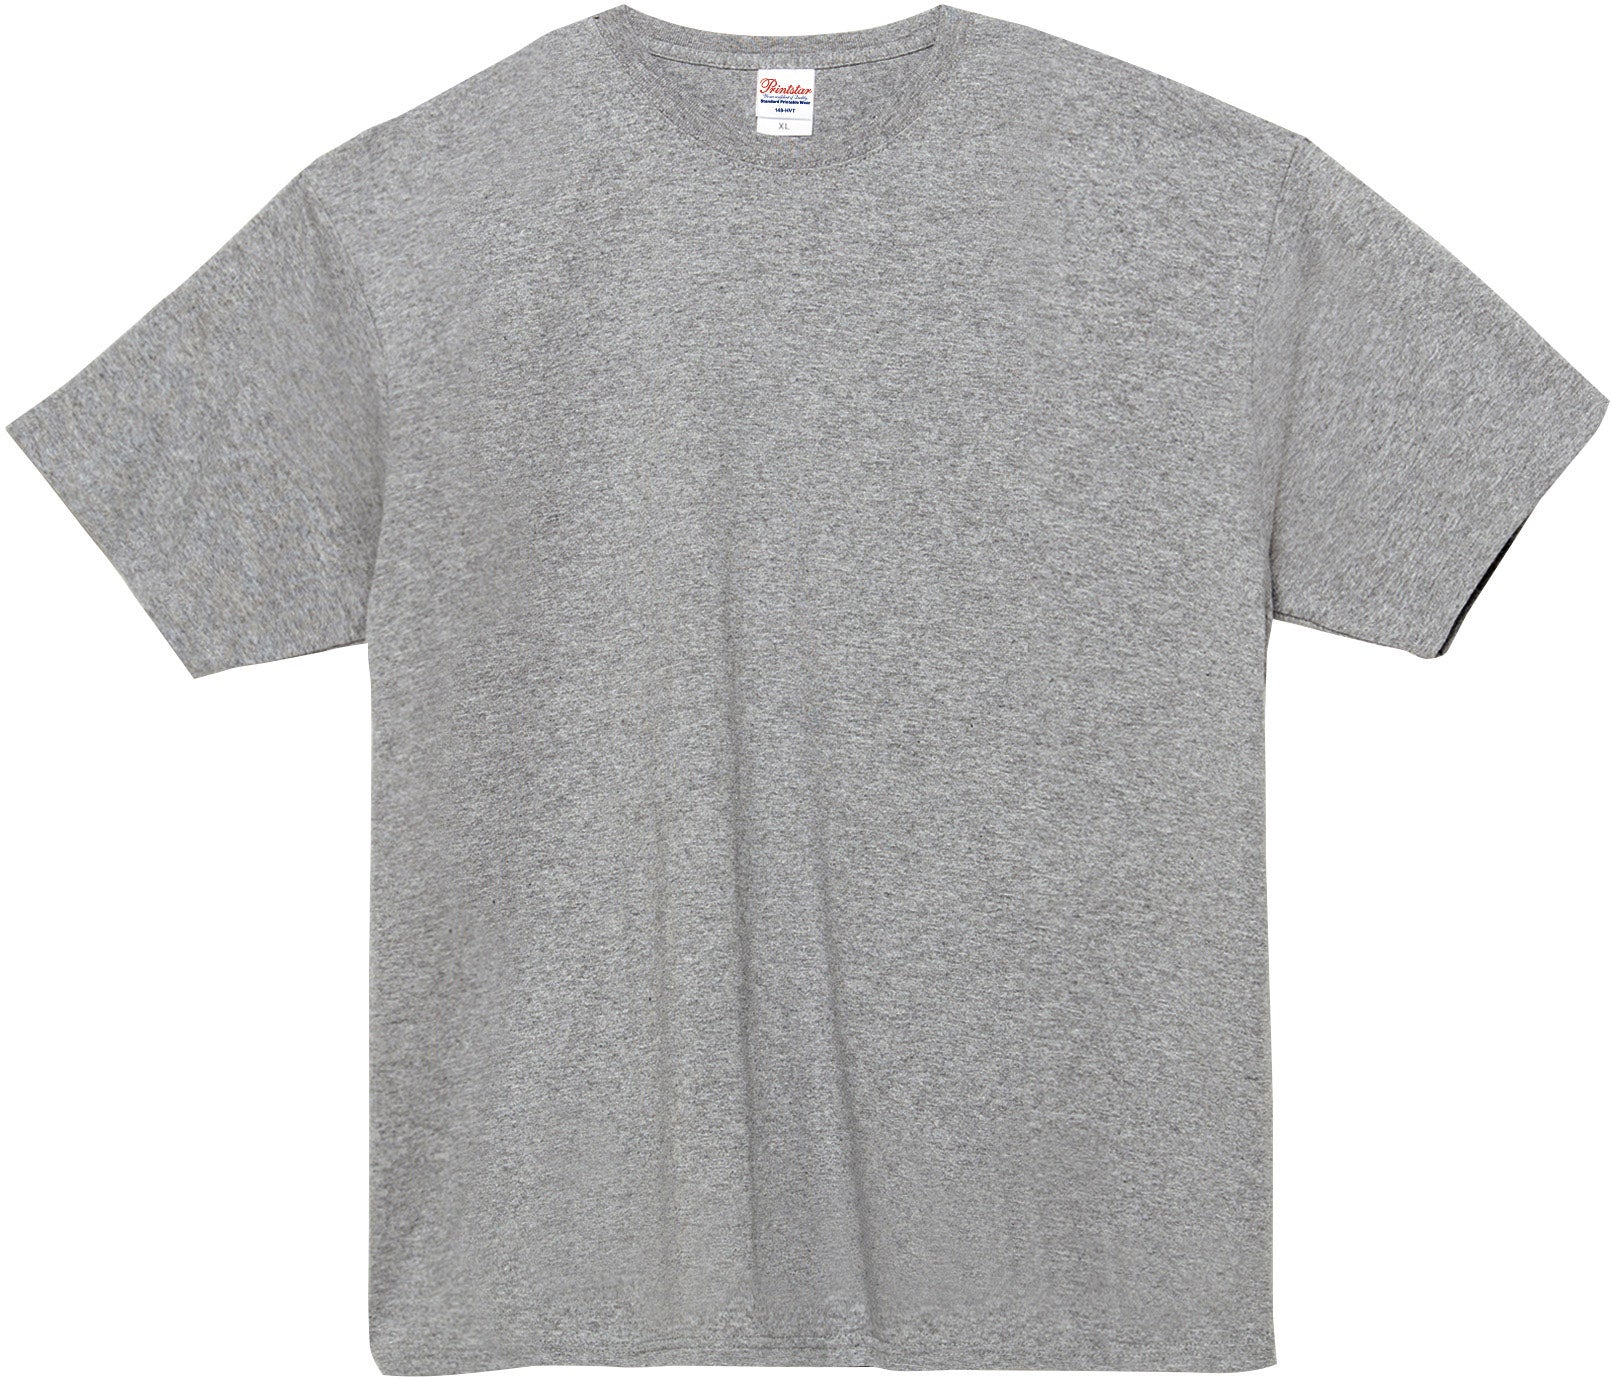 Printstar [*00148-HVT] 7.4 Sustainable Merchandise T-shirts Weight oz Heavy Super Apparel and Corporate –